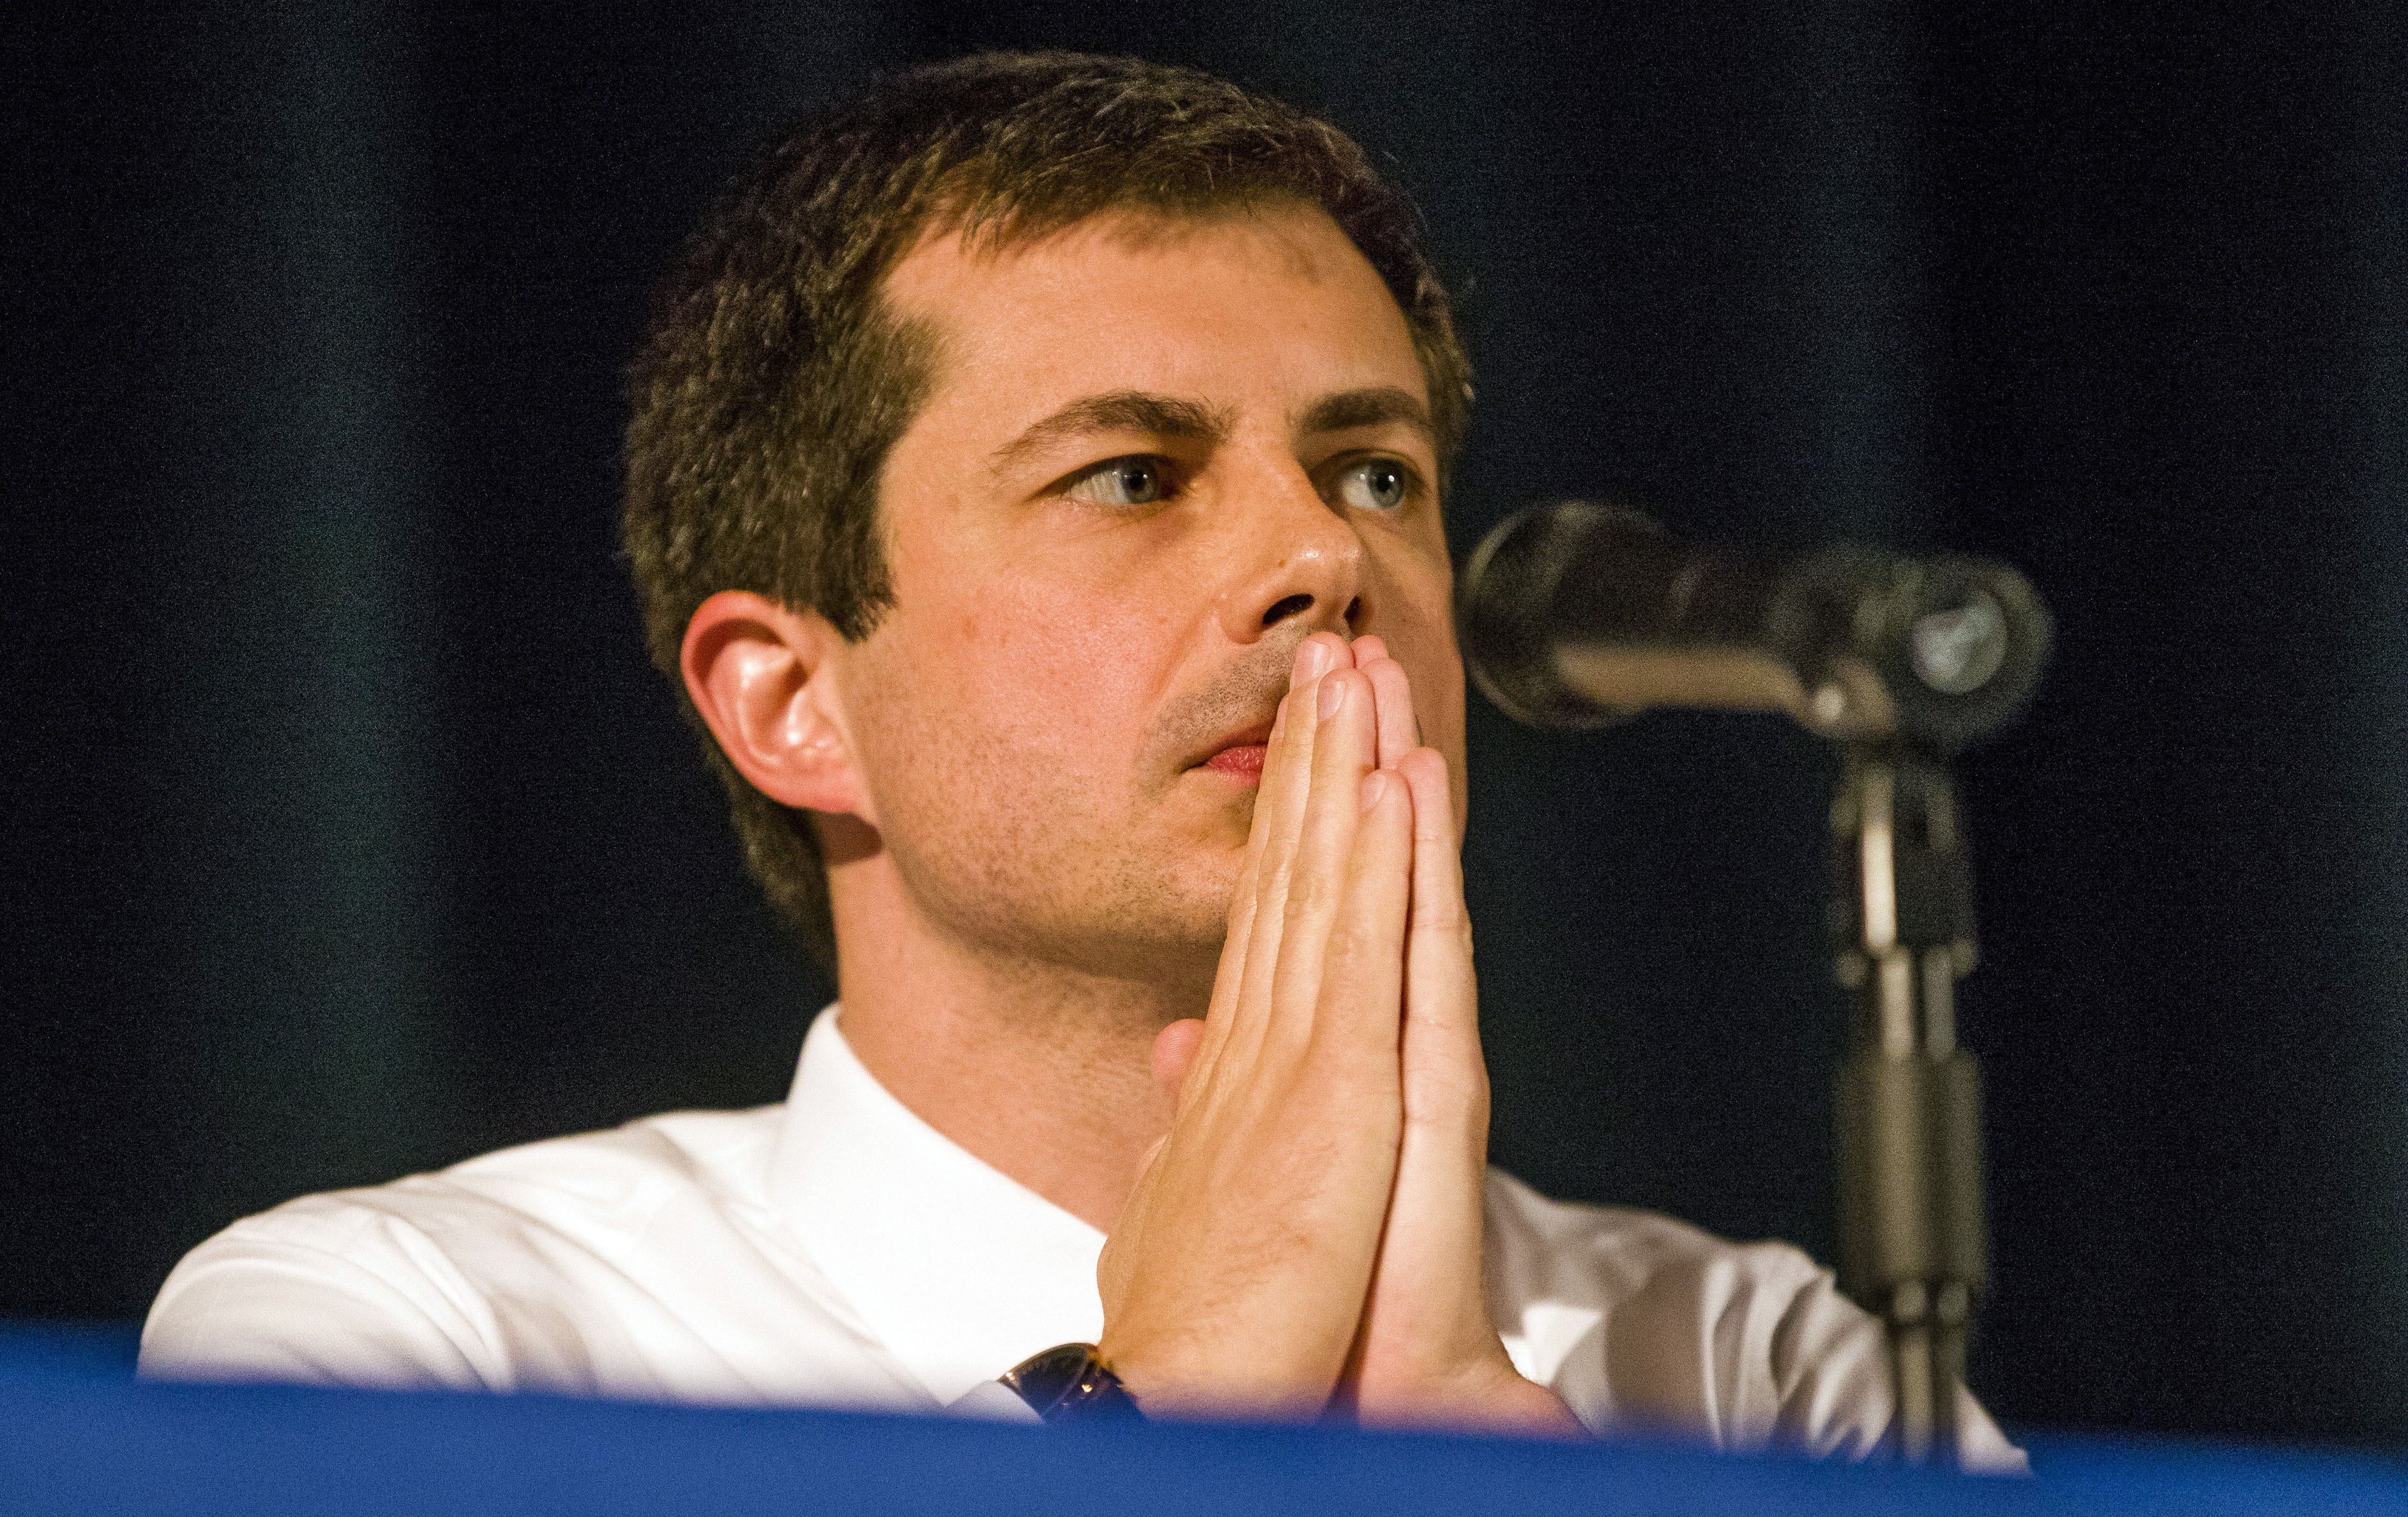 A Police Shooting Gives the Lie to Buttigieg’s Campaign Narrative